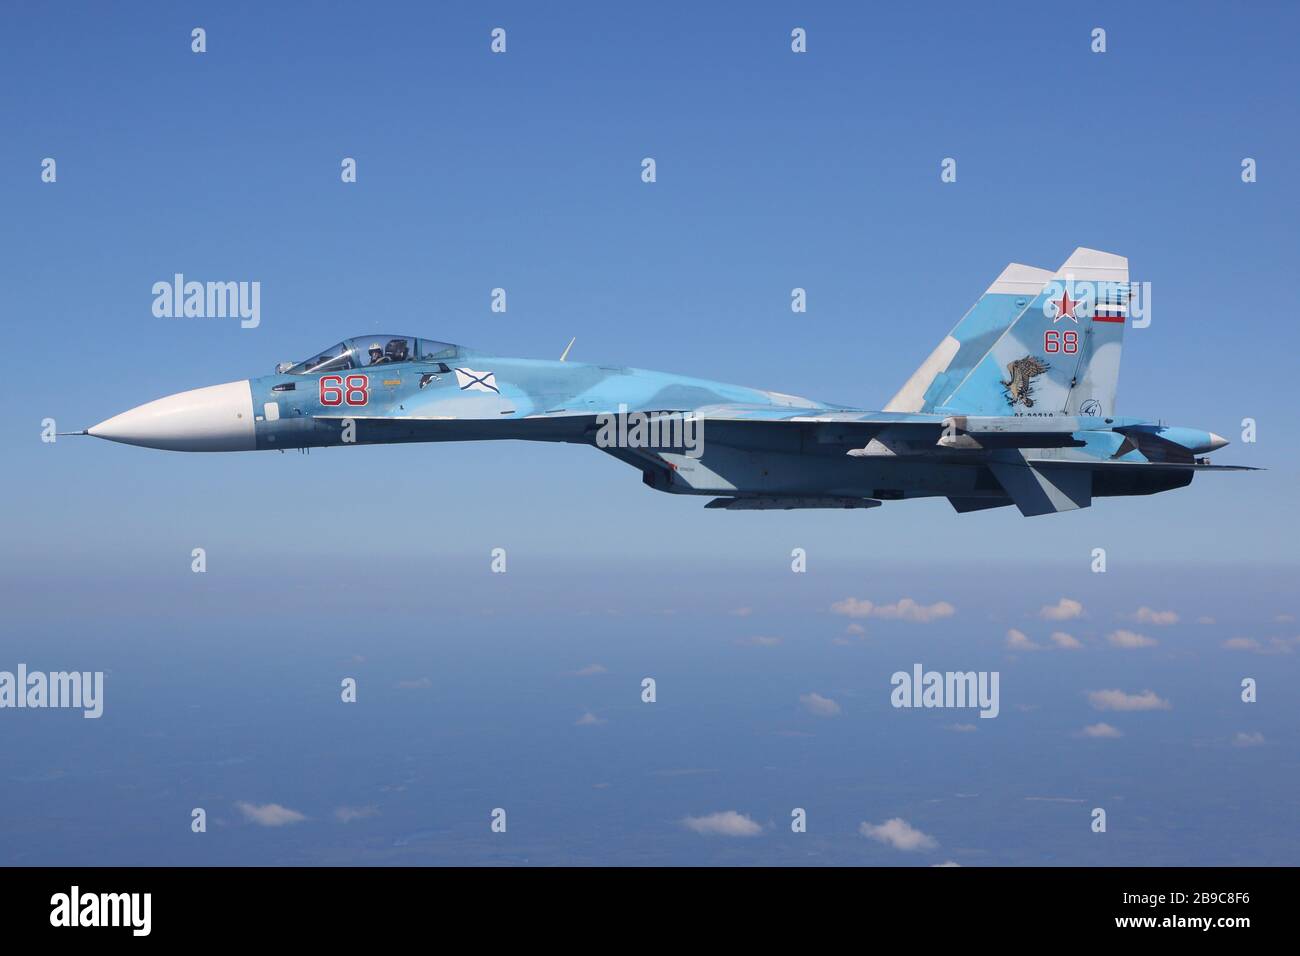 Aerial view of a Su-33 jet fighter of the Russian Navy. Stock Photo